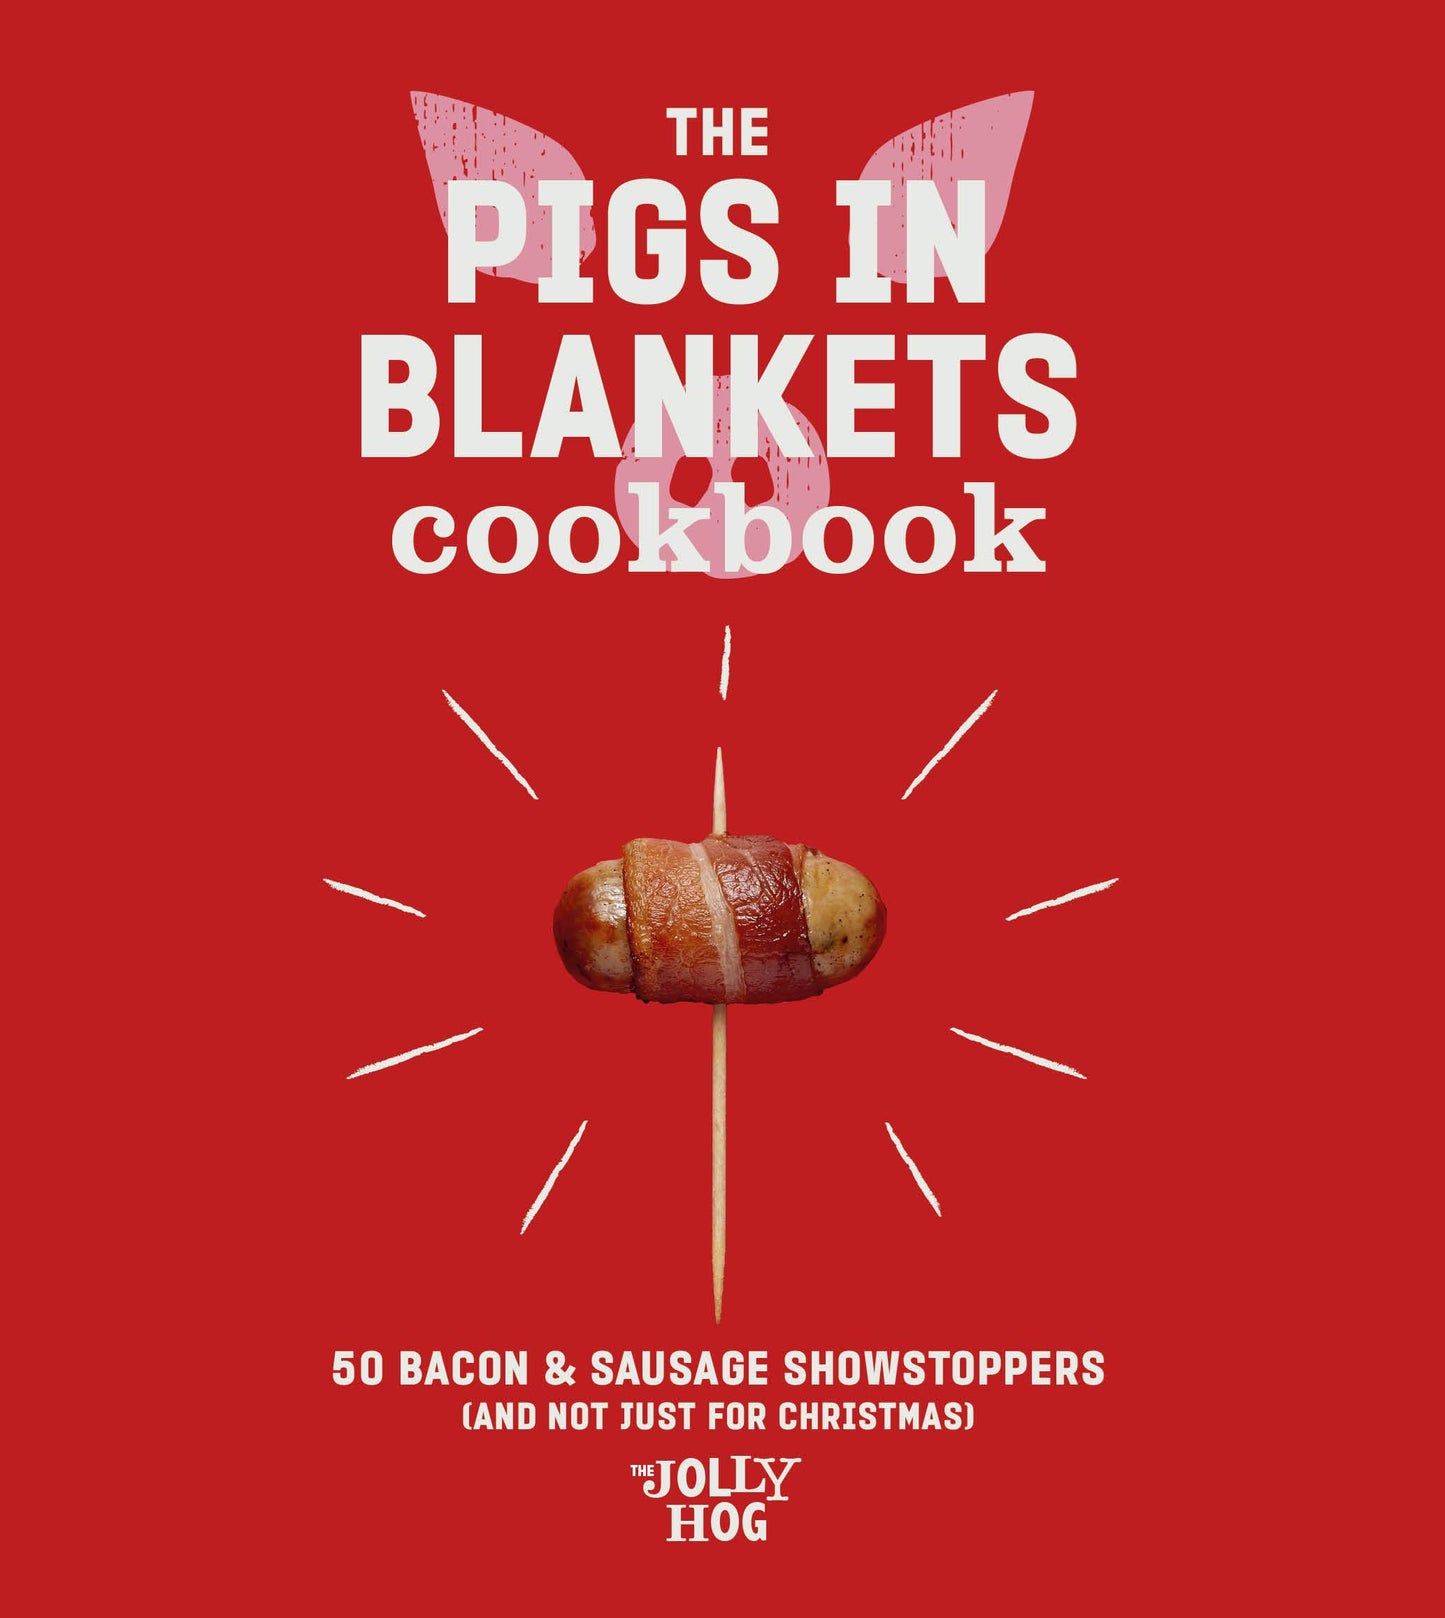 The Pigs In Blankets Cookbook